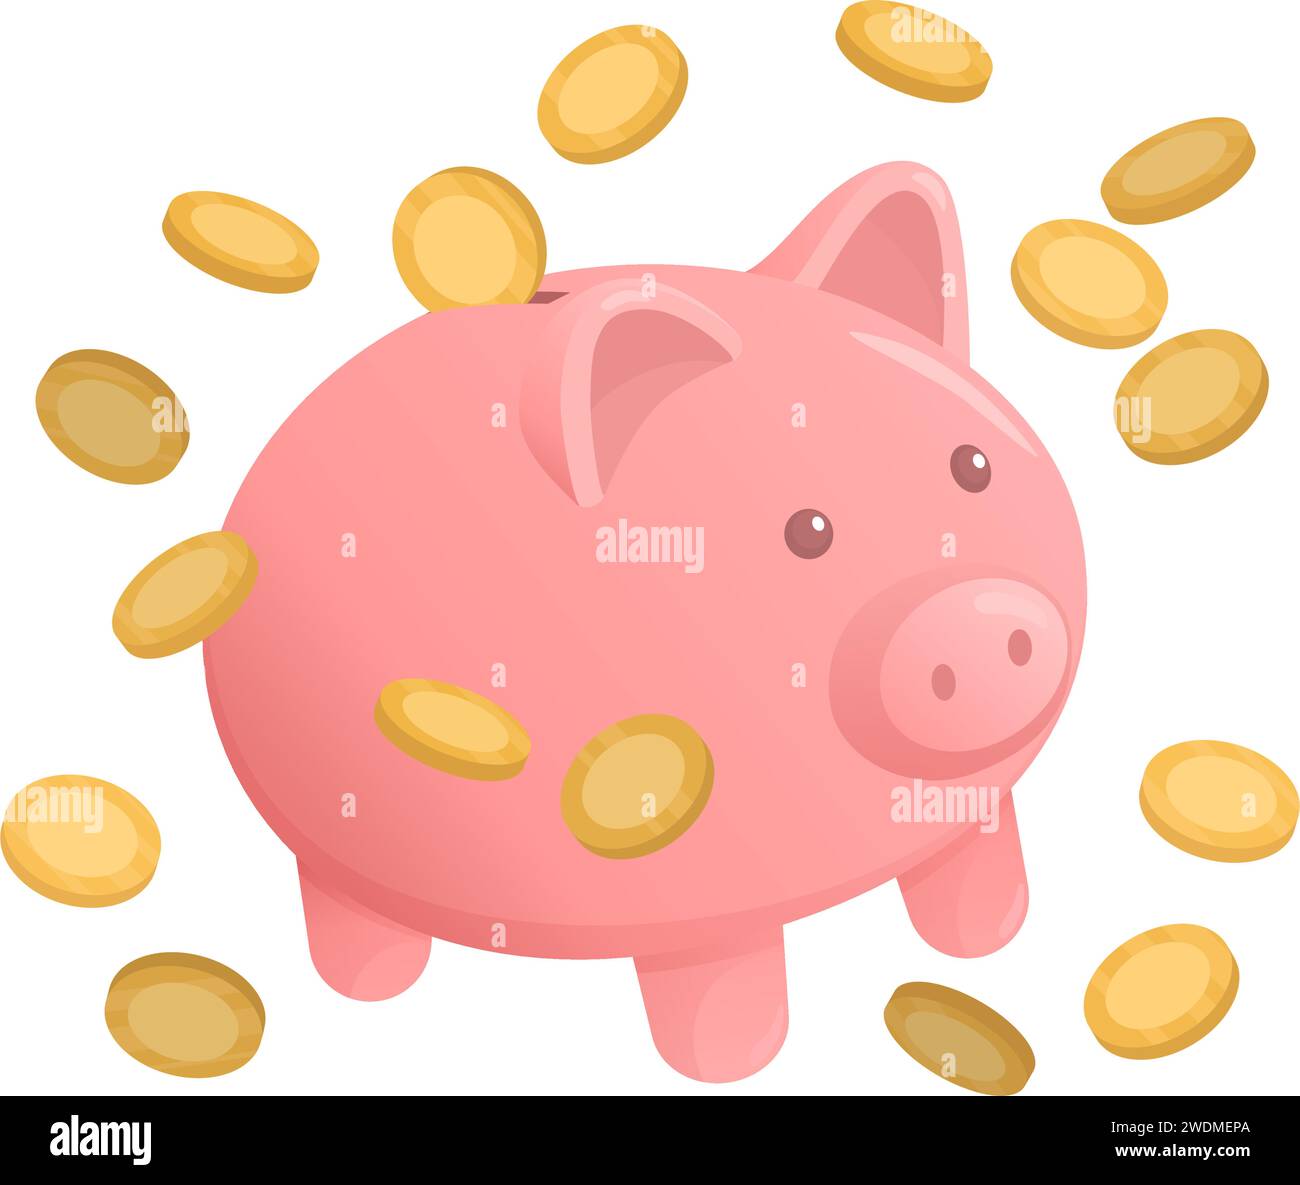 Gold coins and piggy bank: savings and investment concept Stock Vector